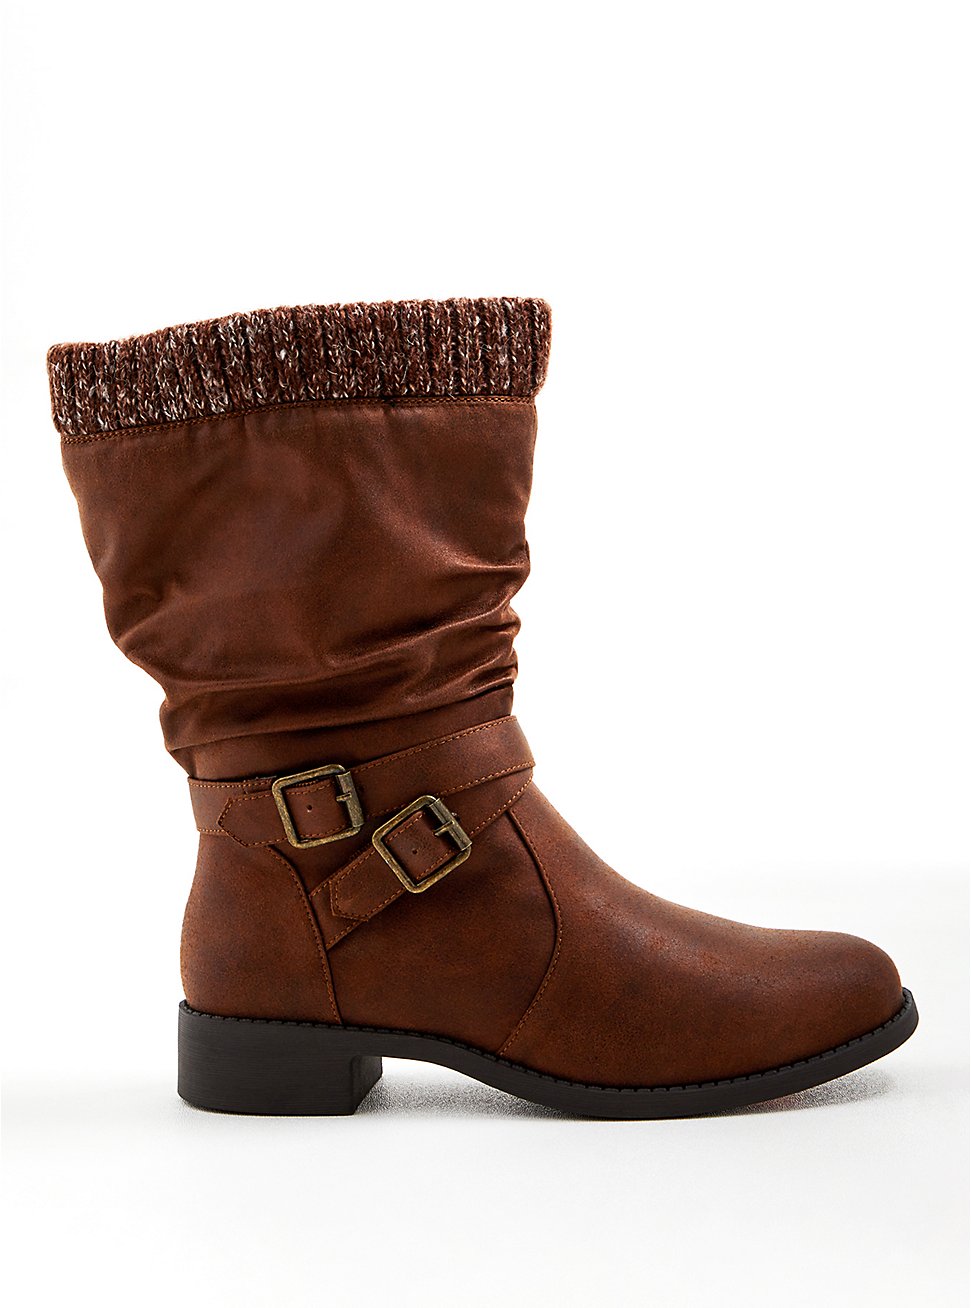 Plus Size Brown Faux Suede Sweater-Trim Boot (WW), BROWN, hi-res